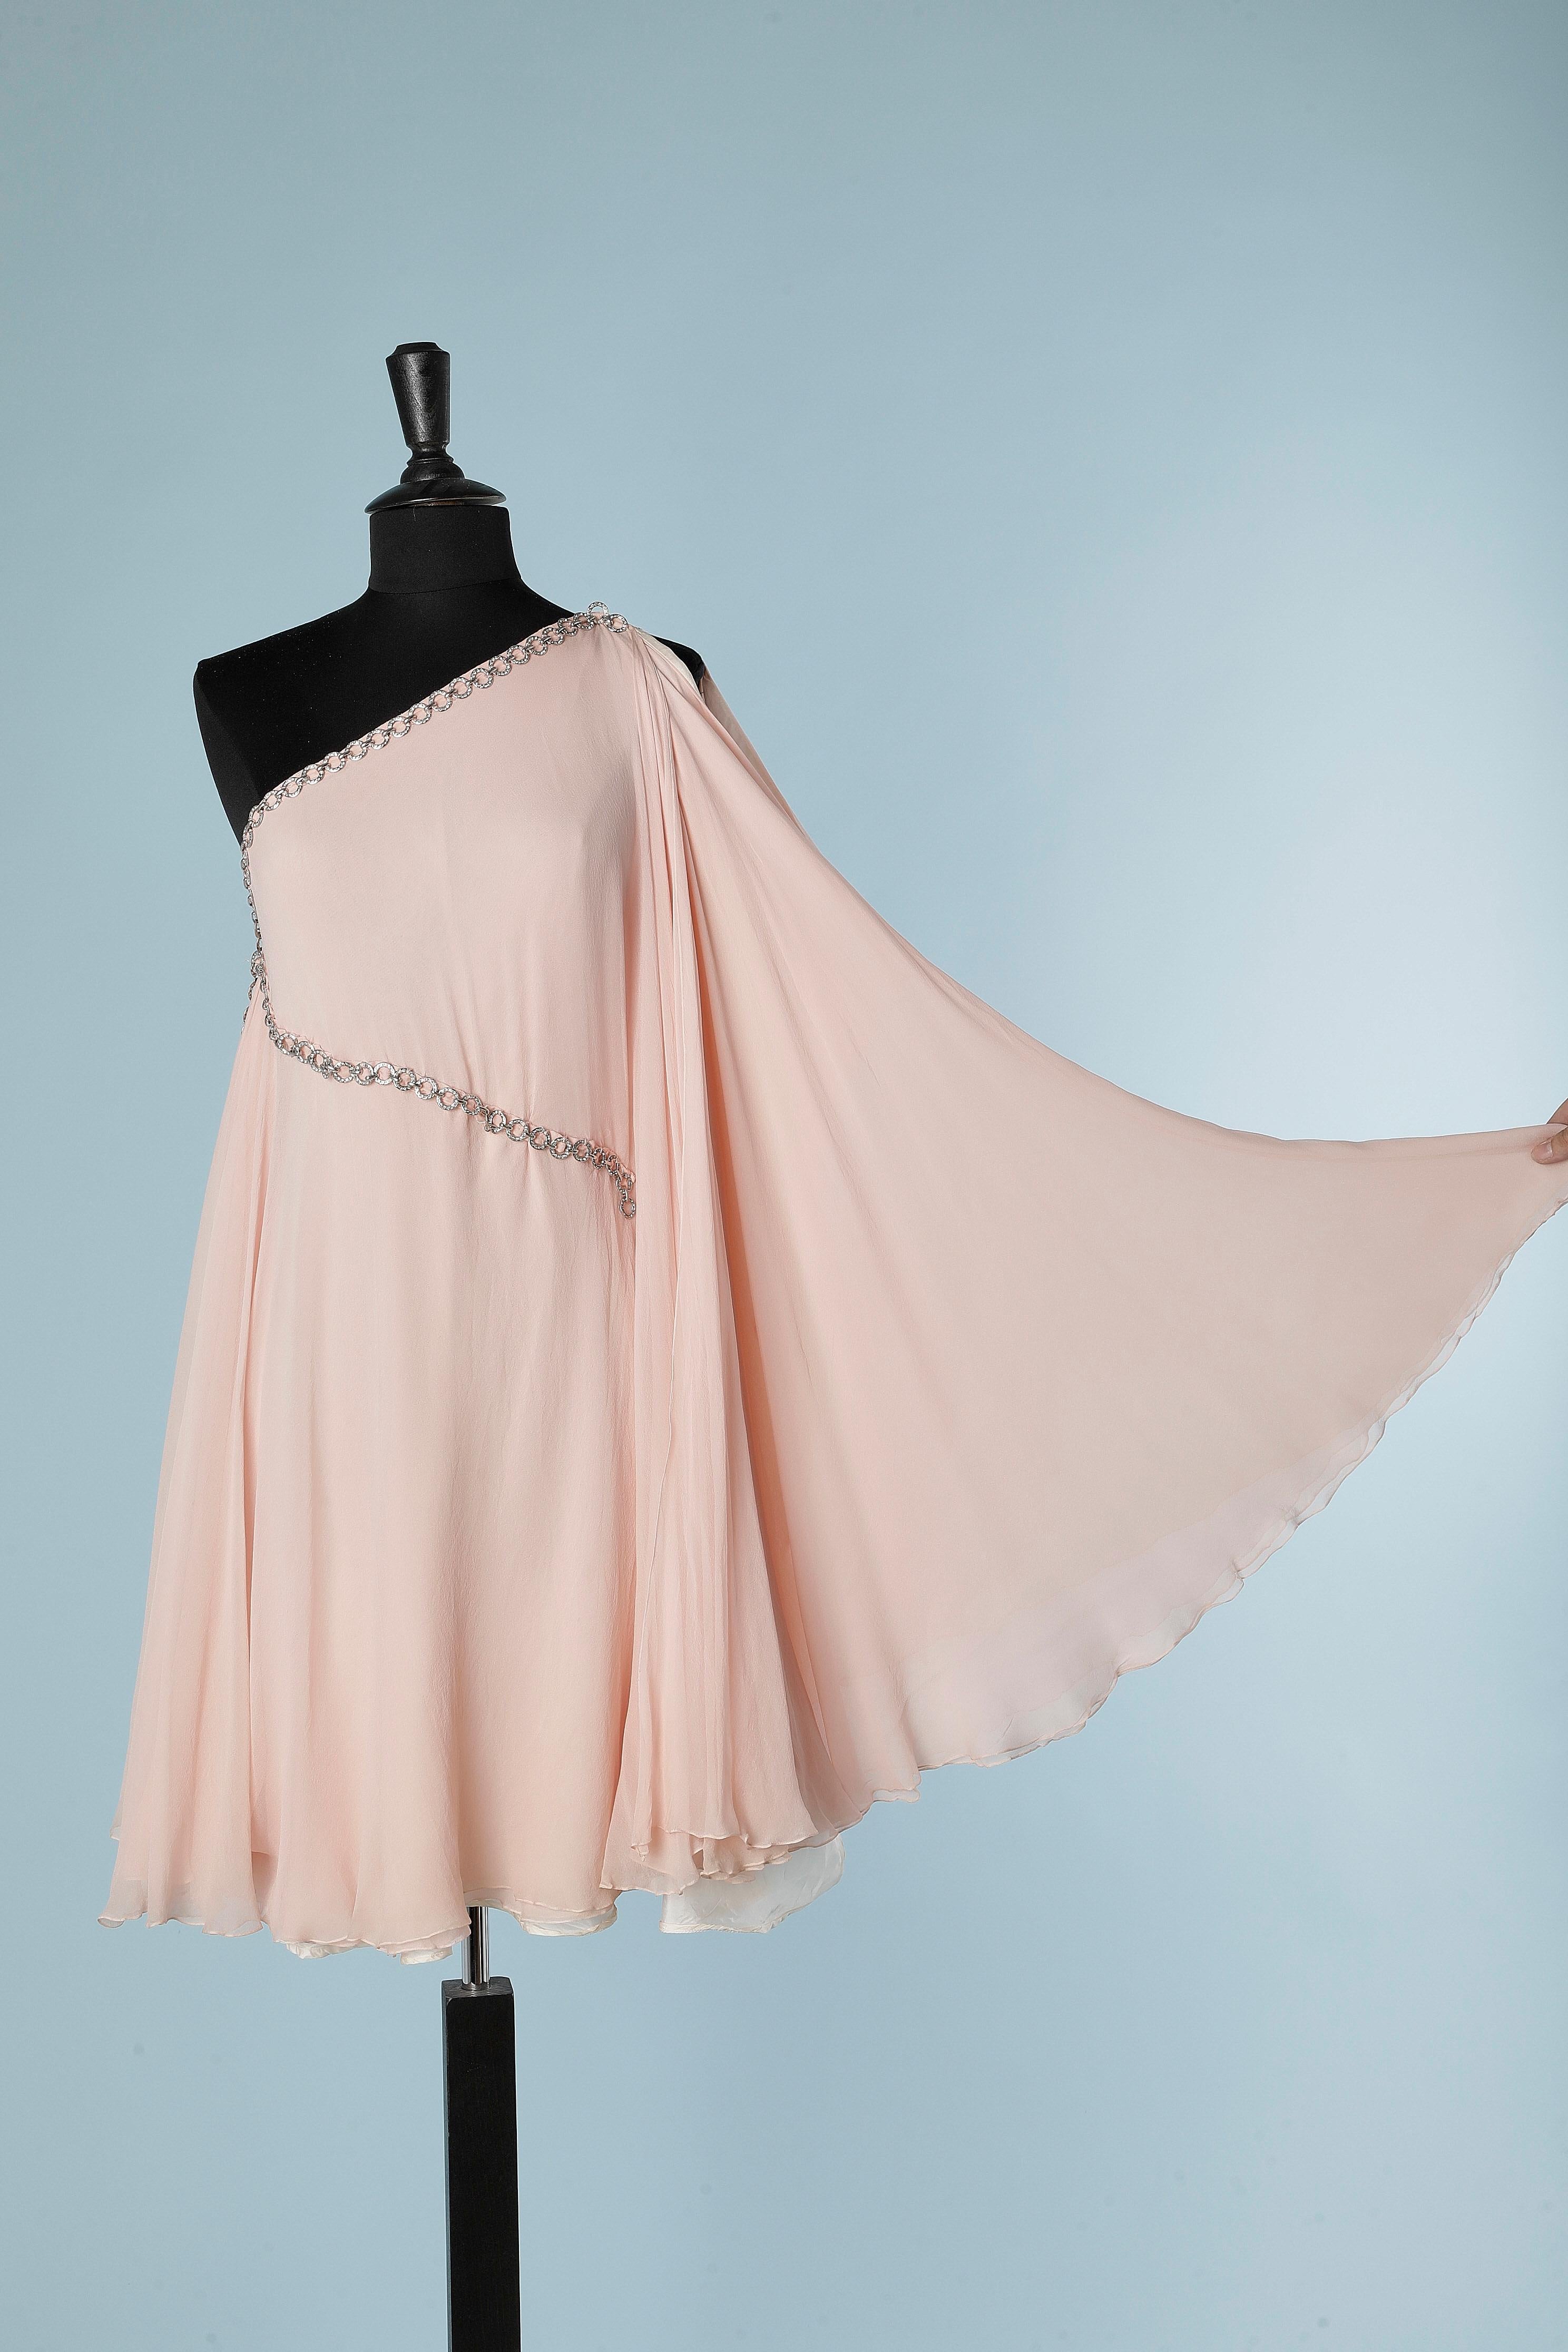 Asymmetrical pale pink babydoll cocktail dress in silk chiffon and chains.
Zip and hook&eye on the left side.
SIZE M 